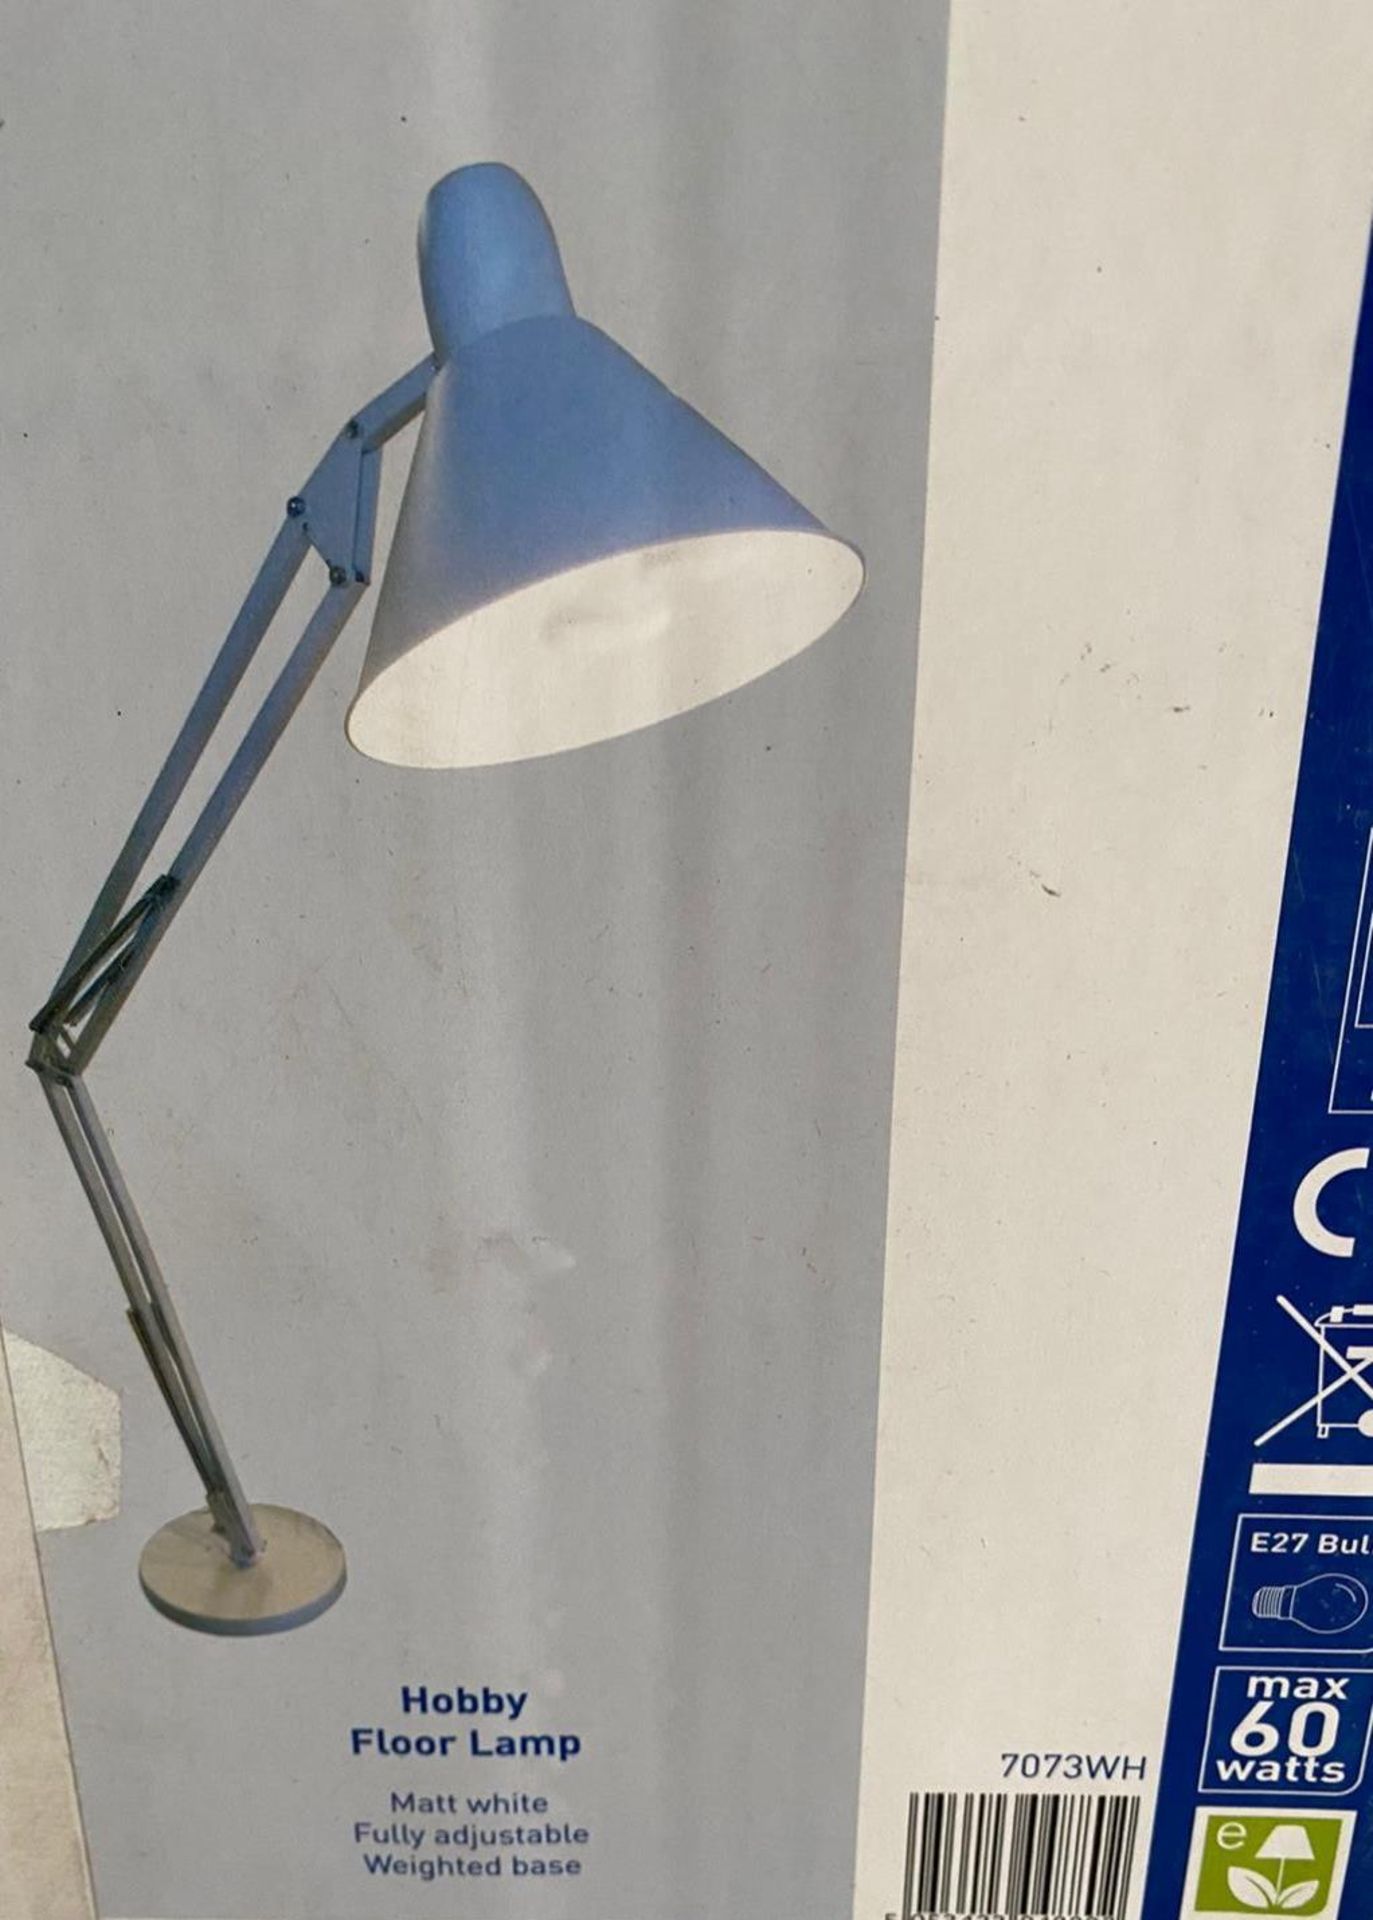 1 x Searchlight Hobby Floor Lamp in matt white - Ref: 7073WH - New and Boxed - RRP: £180